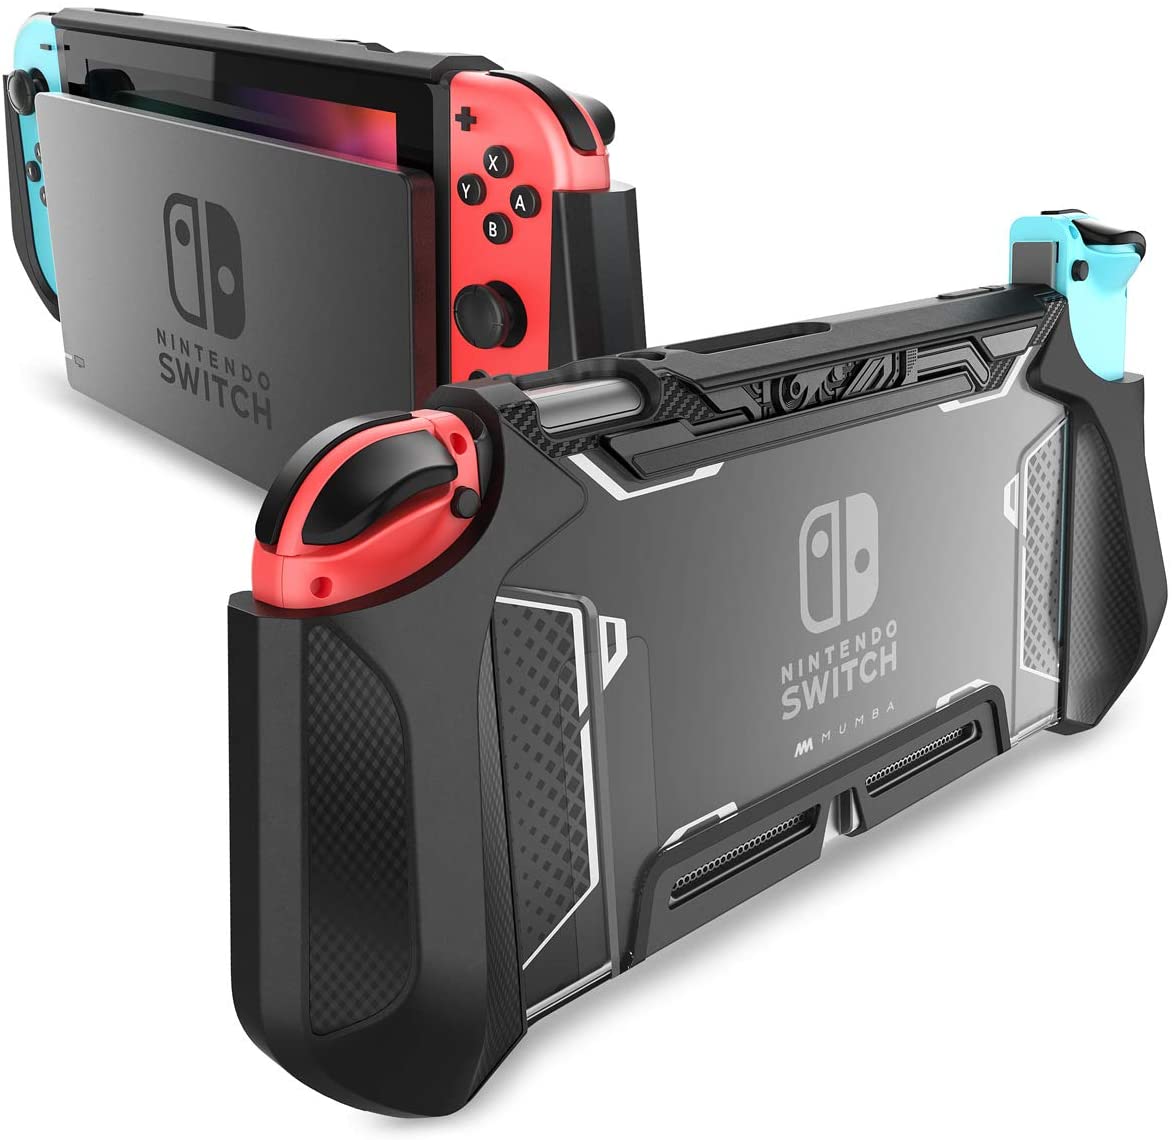 Original Mumba Dockable Case for Nintendo Switch Blade Series with Nintendo Switch Console and Joy-Con Controller (Black)